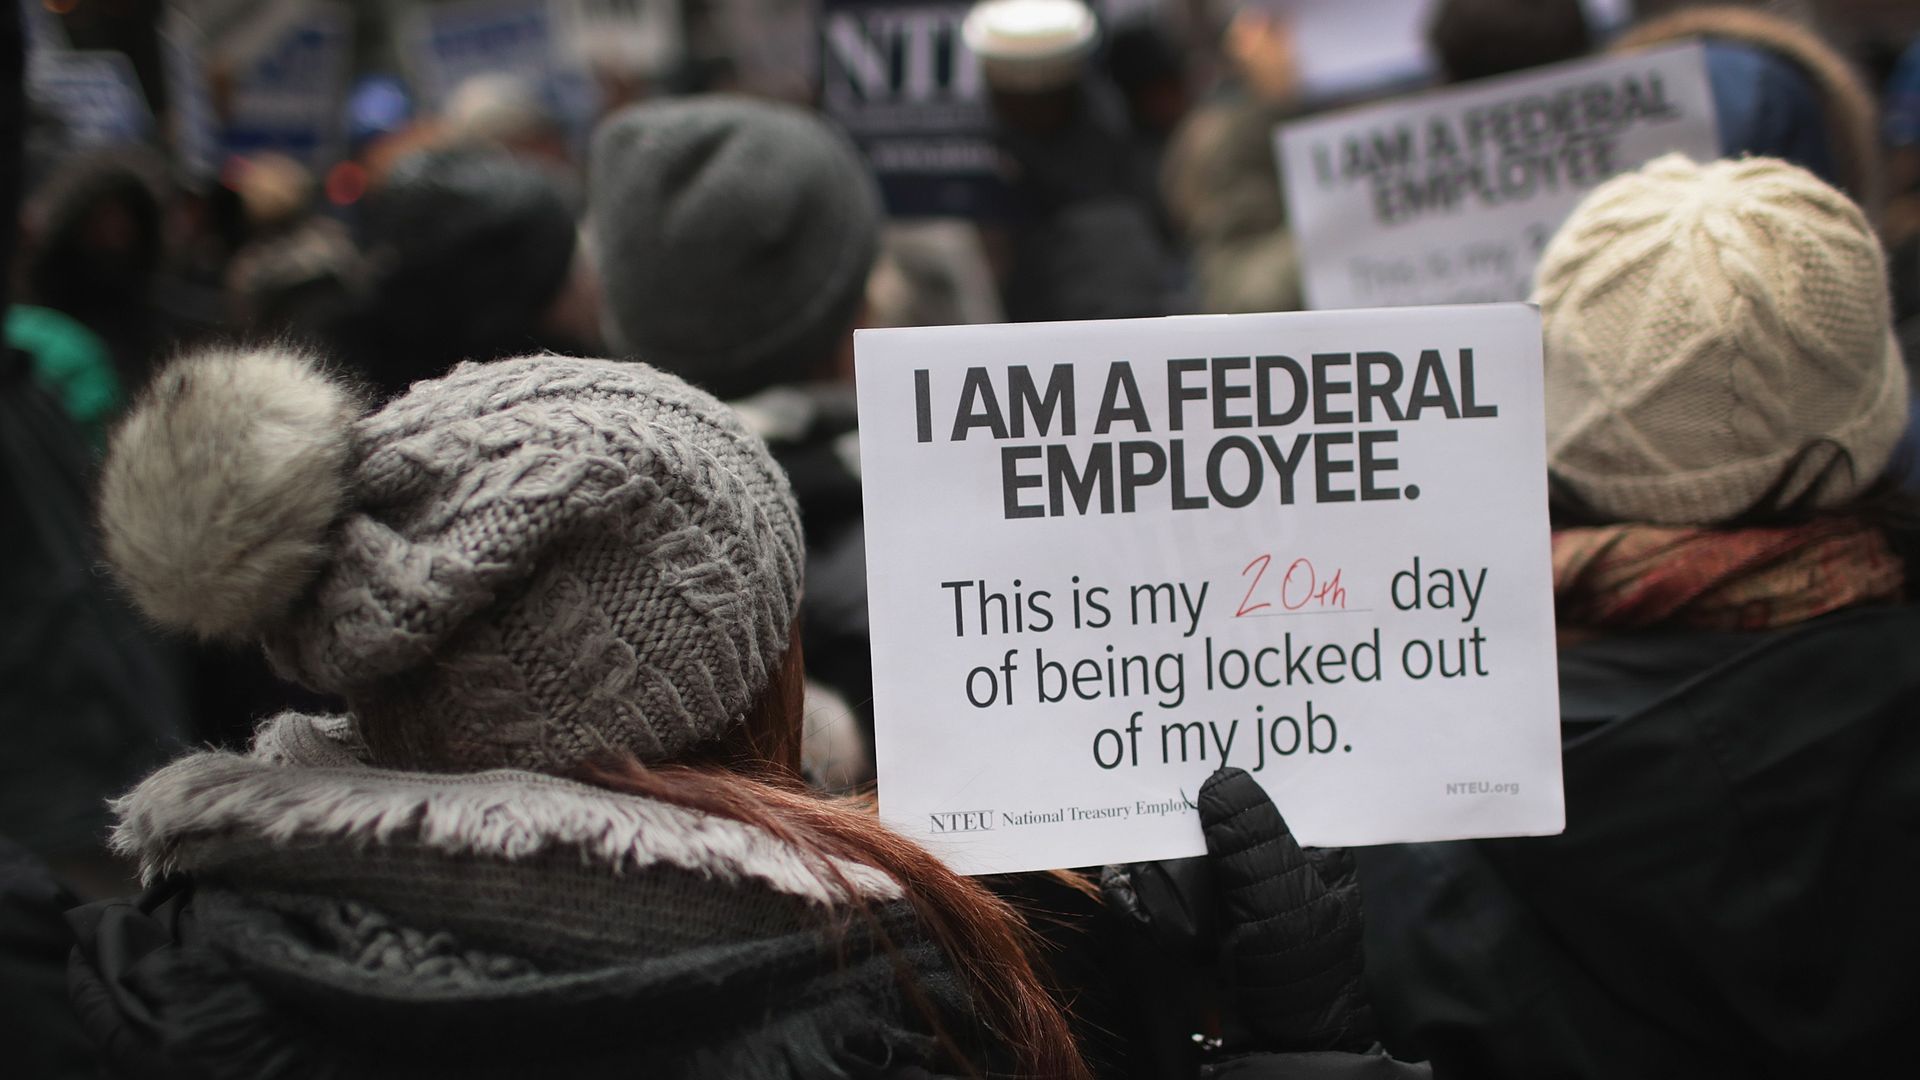 I am a federal employee, this is my 20th day of being locked out of my job sign.